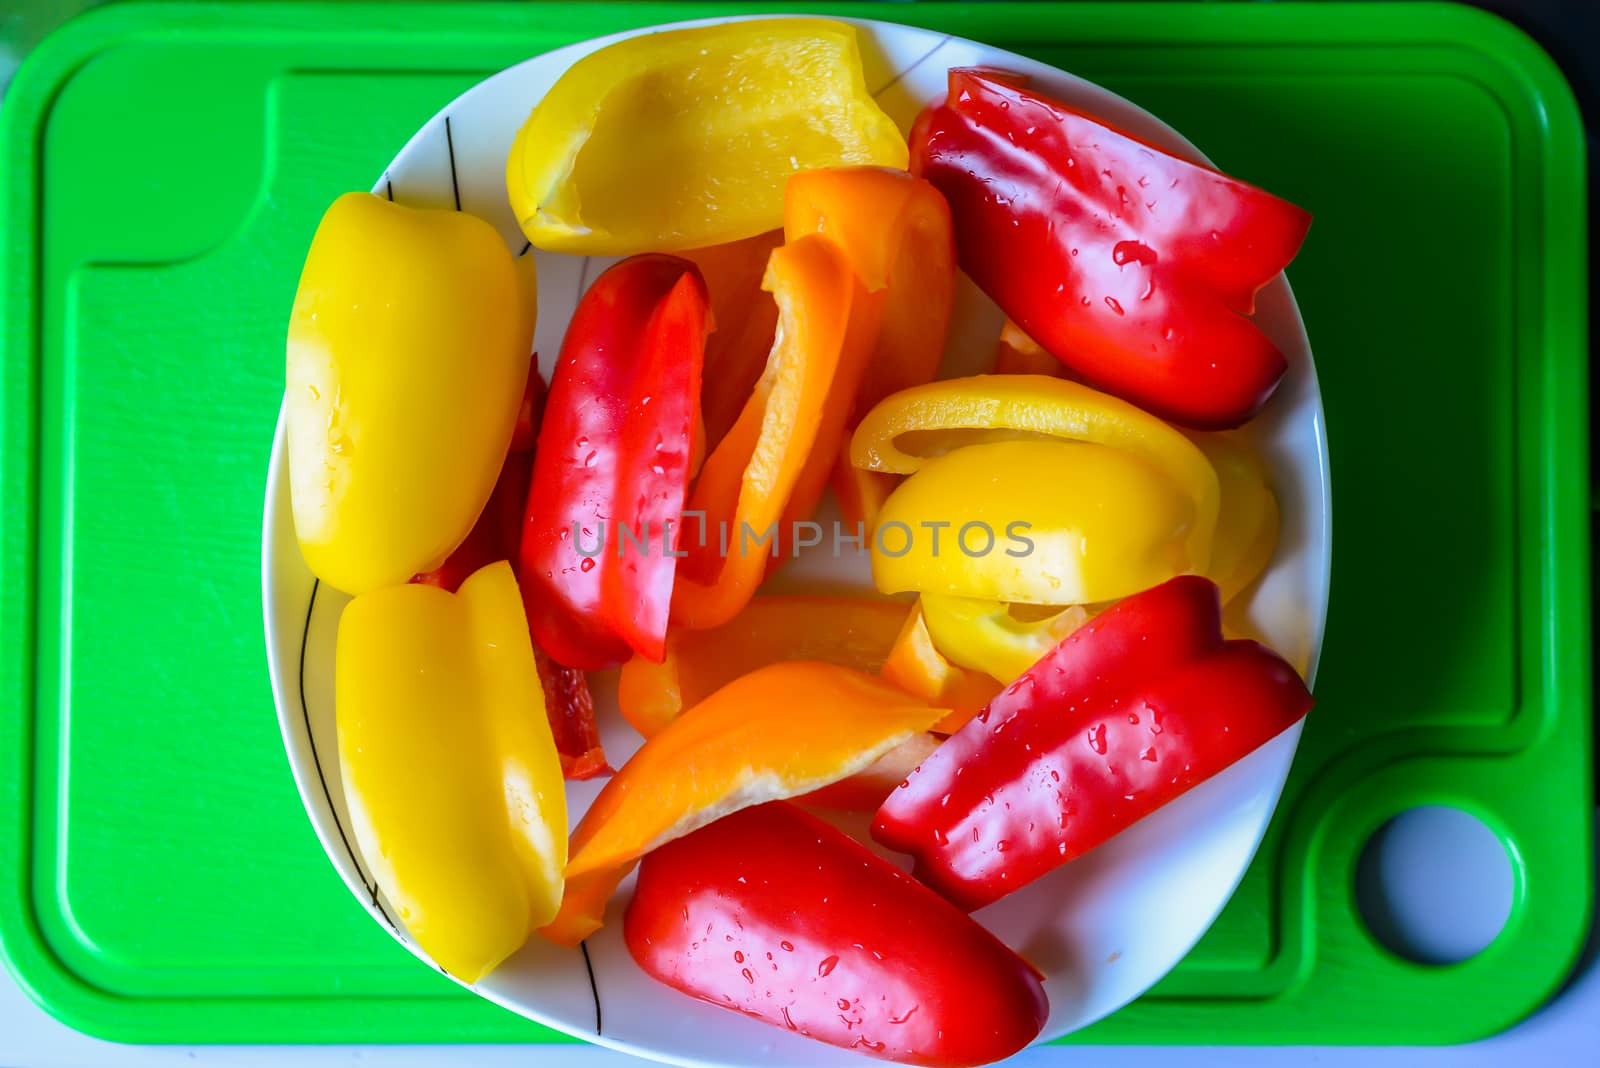 Slices of bell peppers in a white plate on the green plastic board